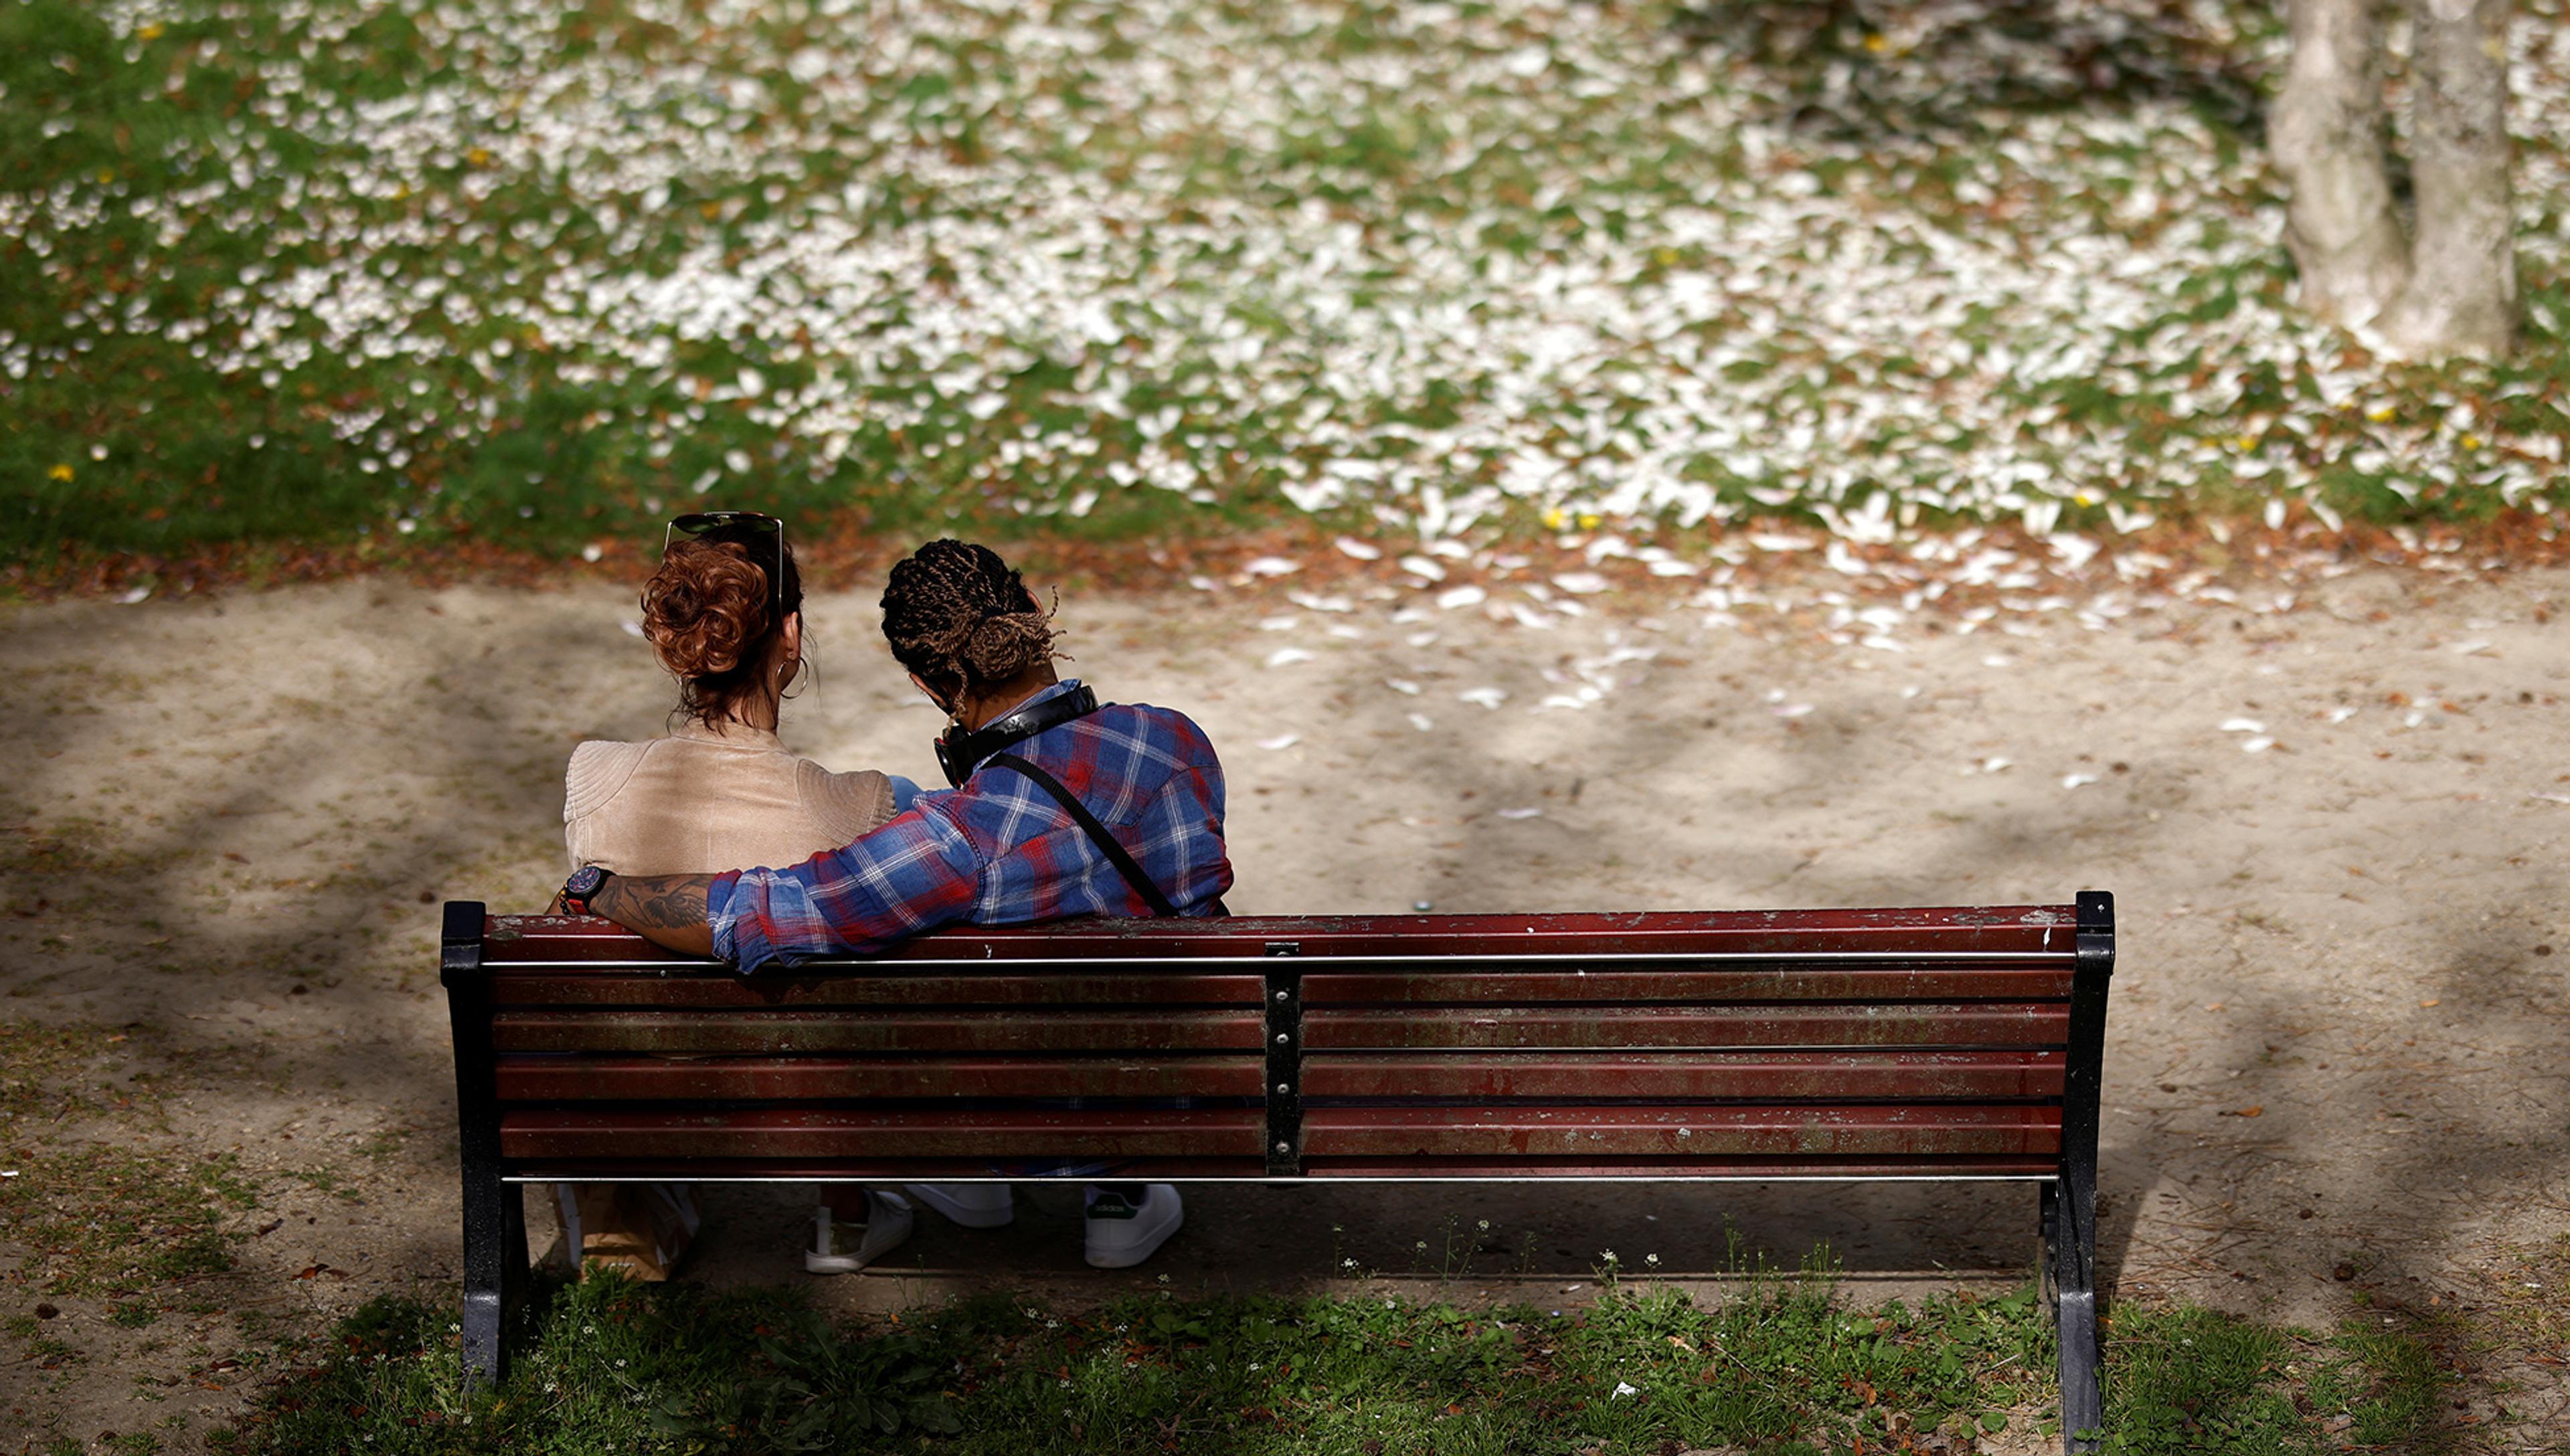 Two people sit on a wooden park bench, one with an arm around the other, with fallen leaves scattered on the ground in front of them.